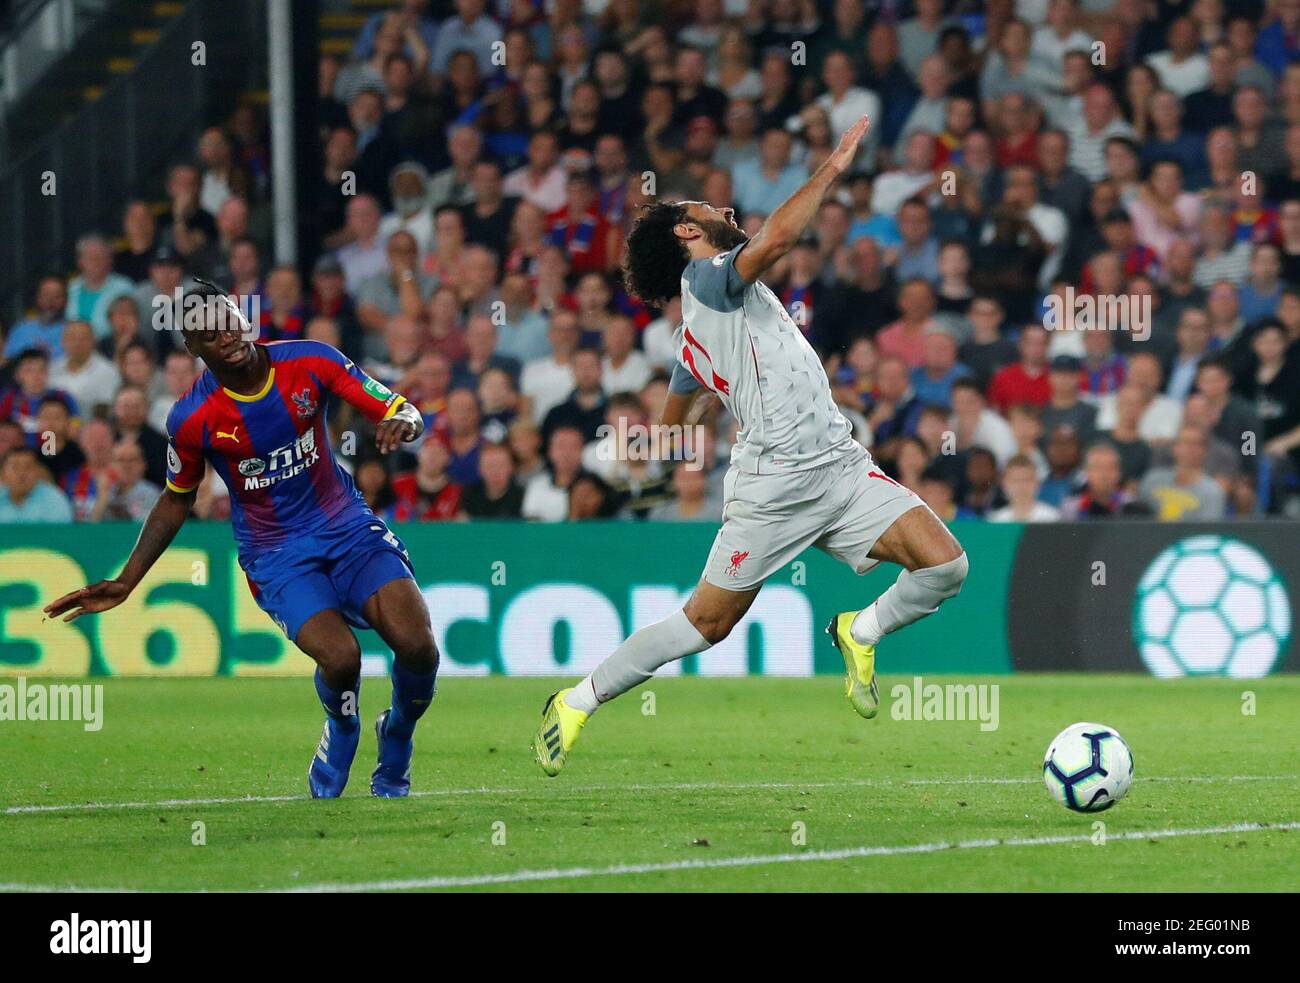 Soccer Football - Premier League - Crystal Palace v Liverpool - Selhurst Park, London, Britain - August 20, 2018  Crystal Palace's Aaron Wan-Bissaka concedes a foul against Liverpool's Mohamed Salah and is subsequently shown a red card by the referee                      REUTERS/Eddie Keogh  EDITORIAL USE ONLY. No use with unauthorized audio, video, data, fixture lists, club/league logos or 'live' services. Online in-match use limited to 75 images, no video emulation. No use in betting, games or single club/league/player publications.  Please contact your account representative for further det Stock Photo